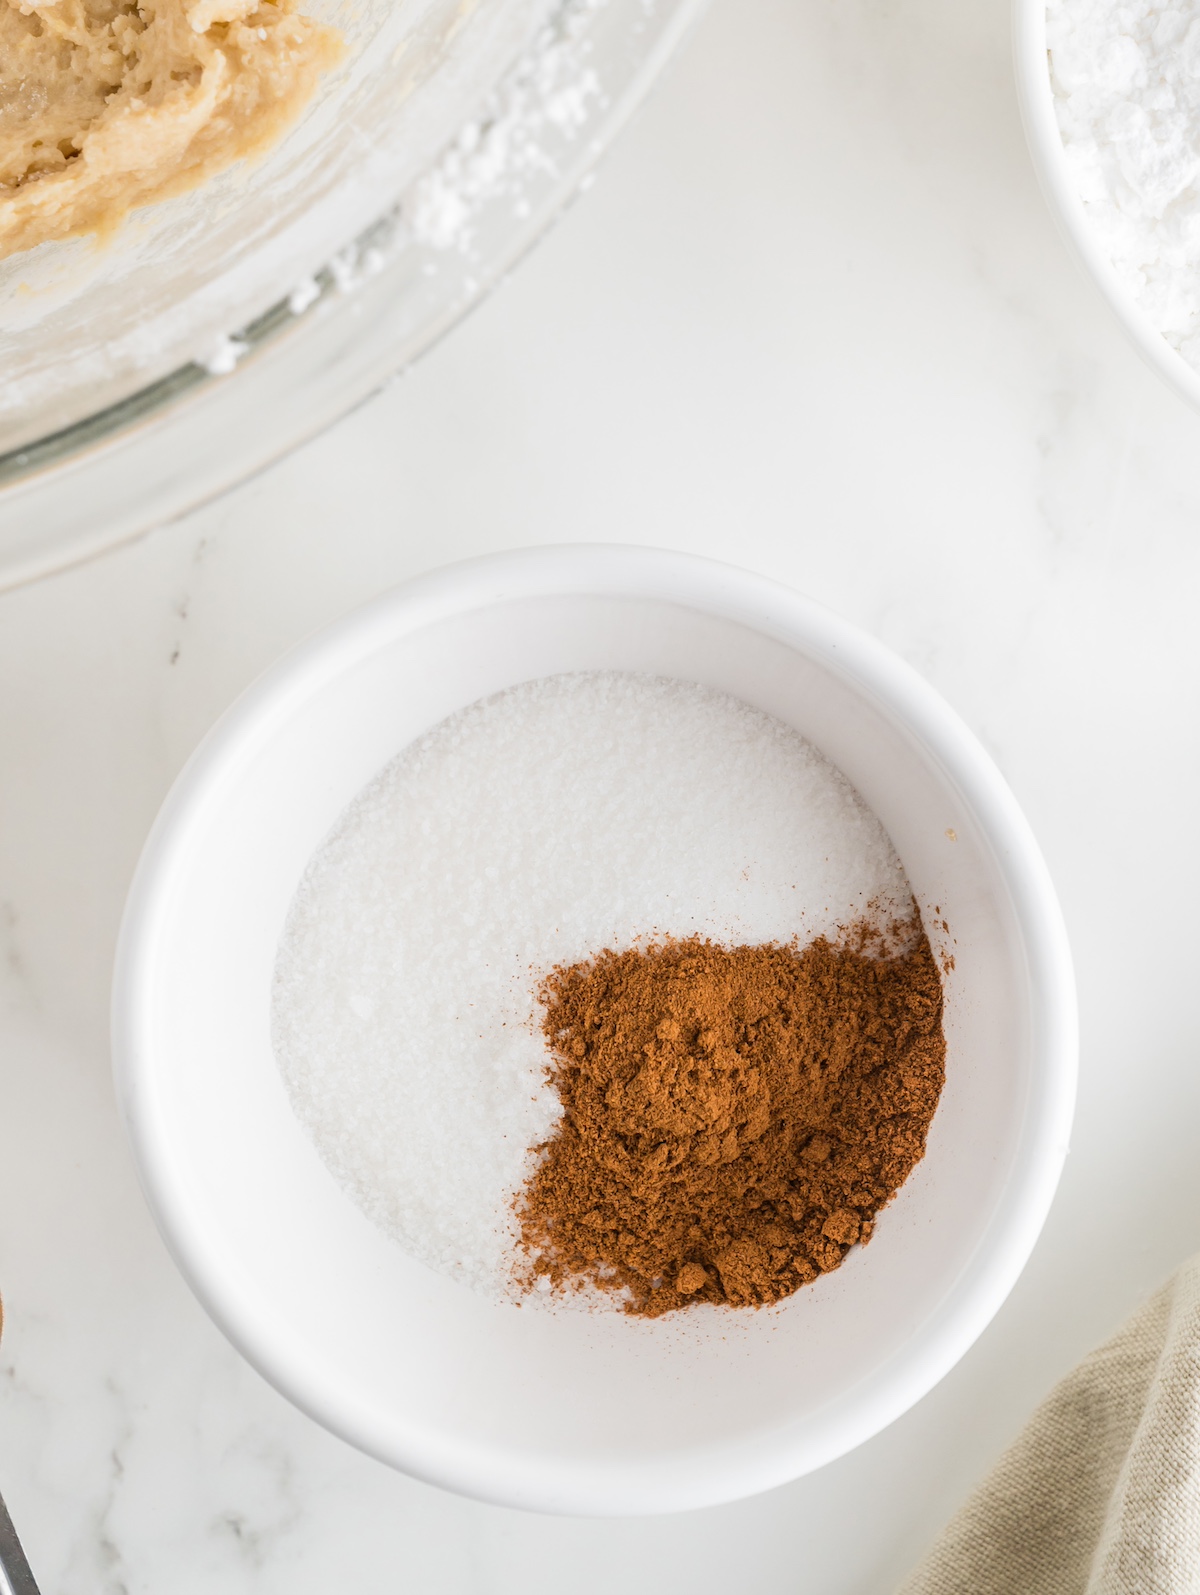 Stir together the white sugar and cinnamon in a small bowl